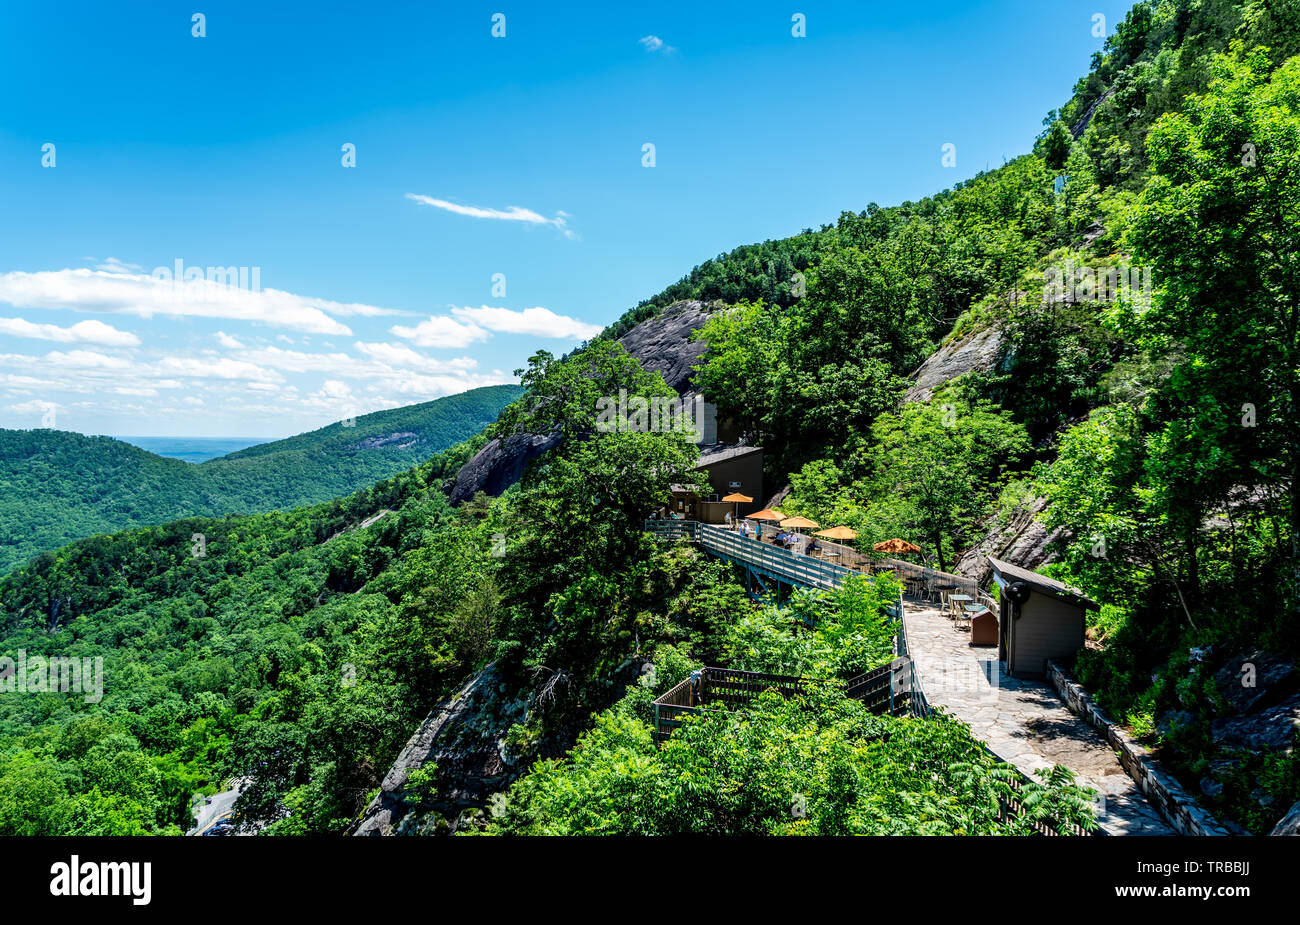 Much of the beauty you will see from hiking your way up to the top of Chimney rock and beyond it. Stock Photo